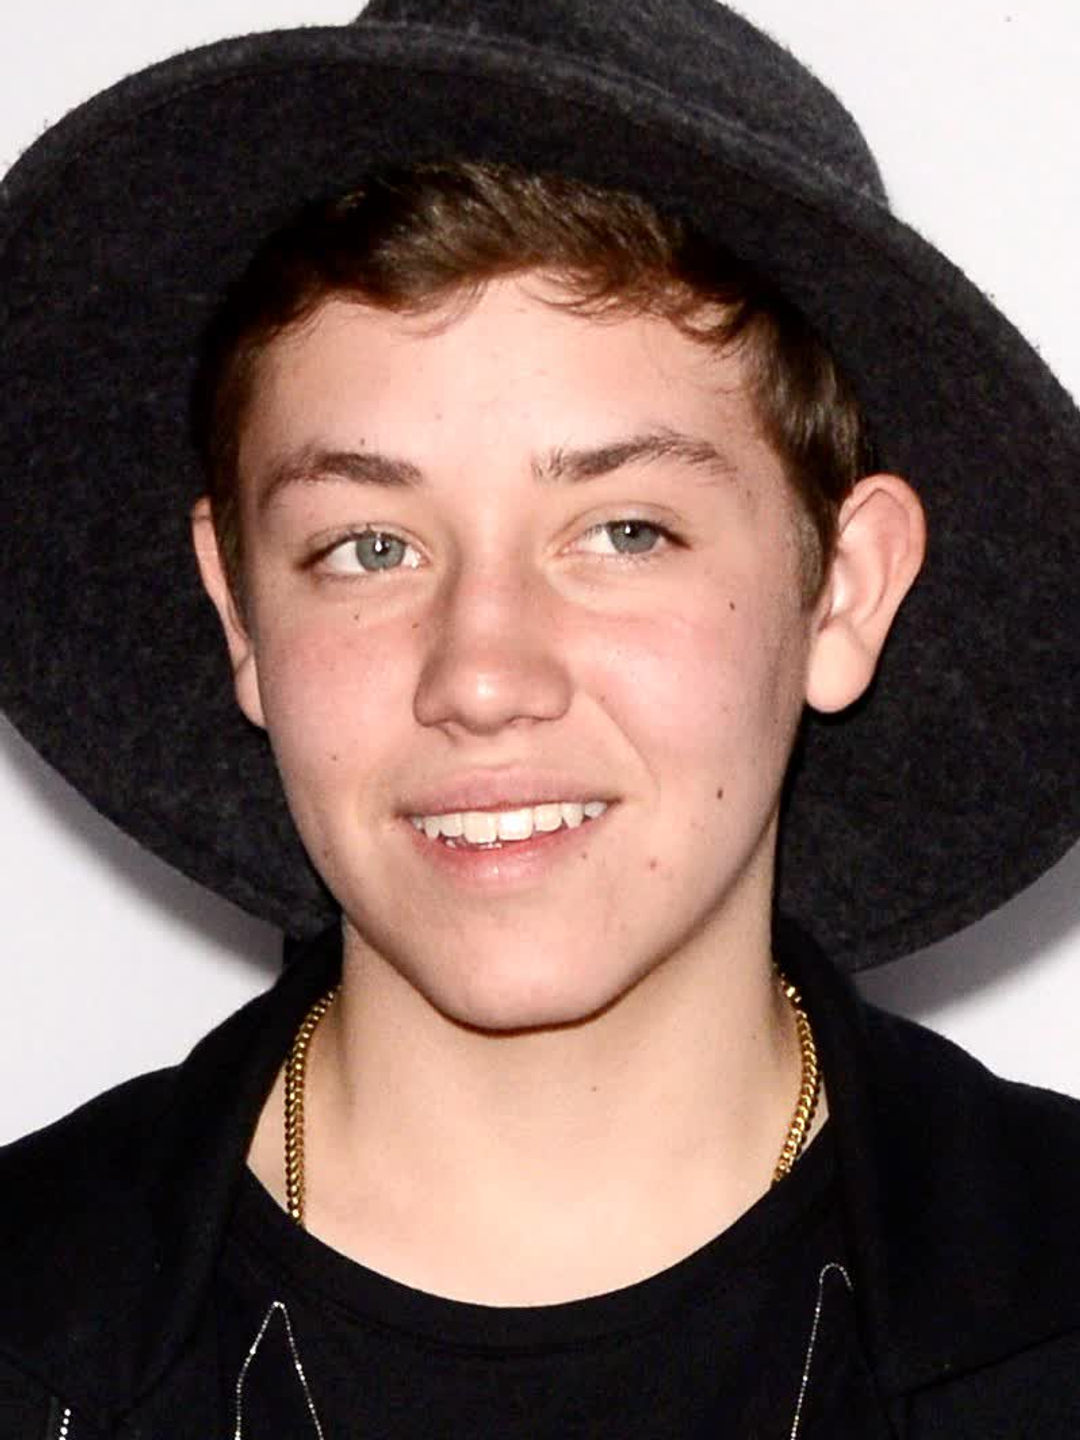 Ethan Cutkosky who is his father